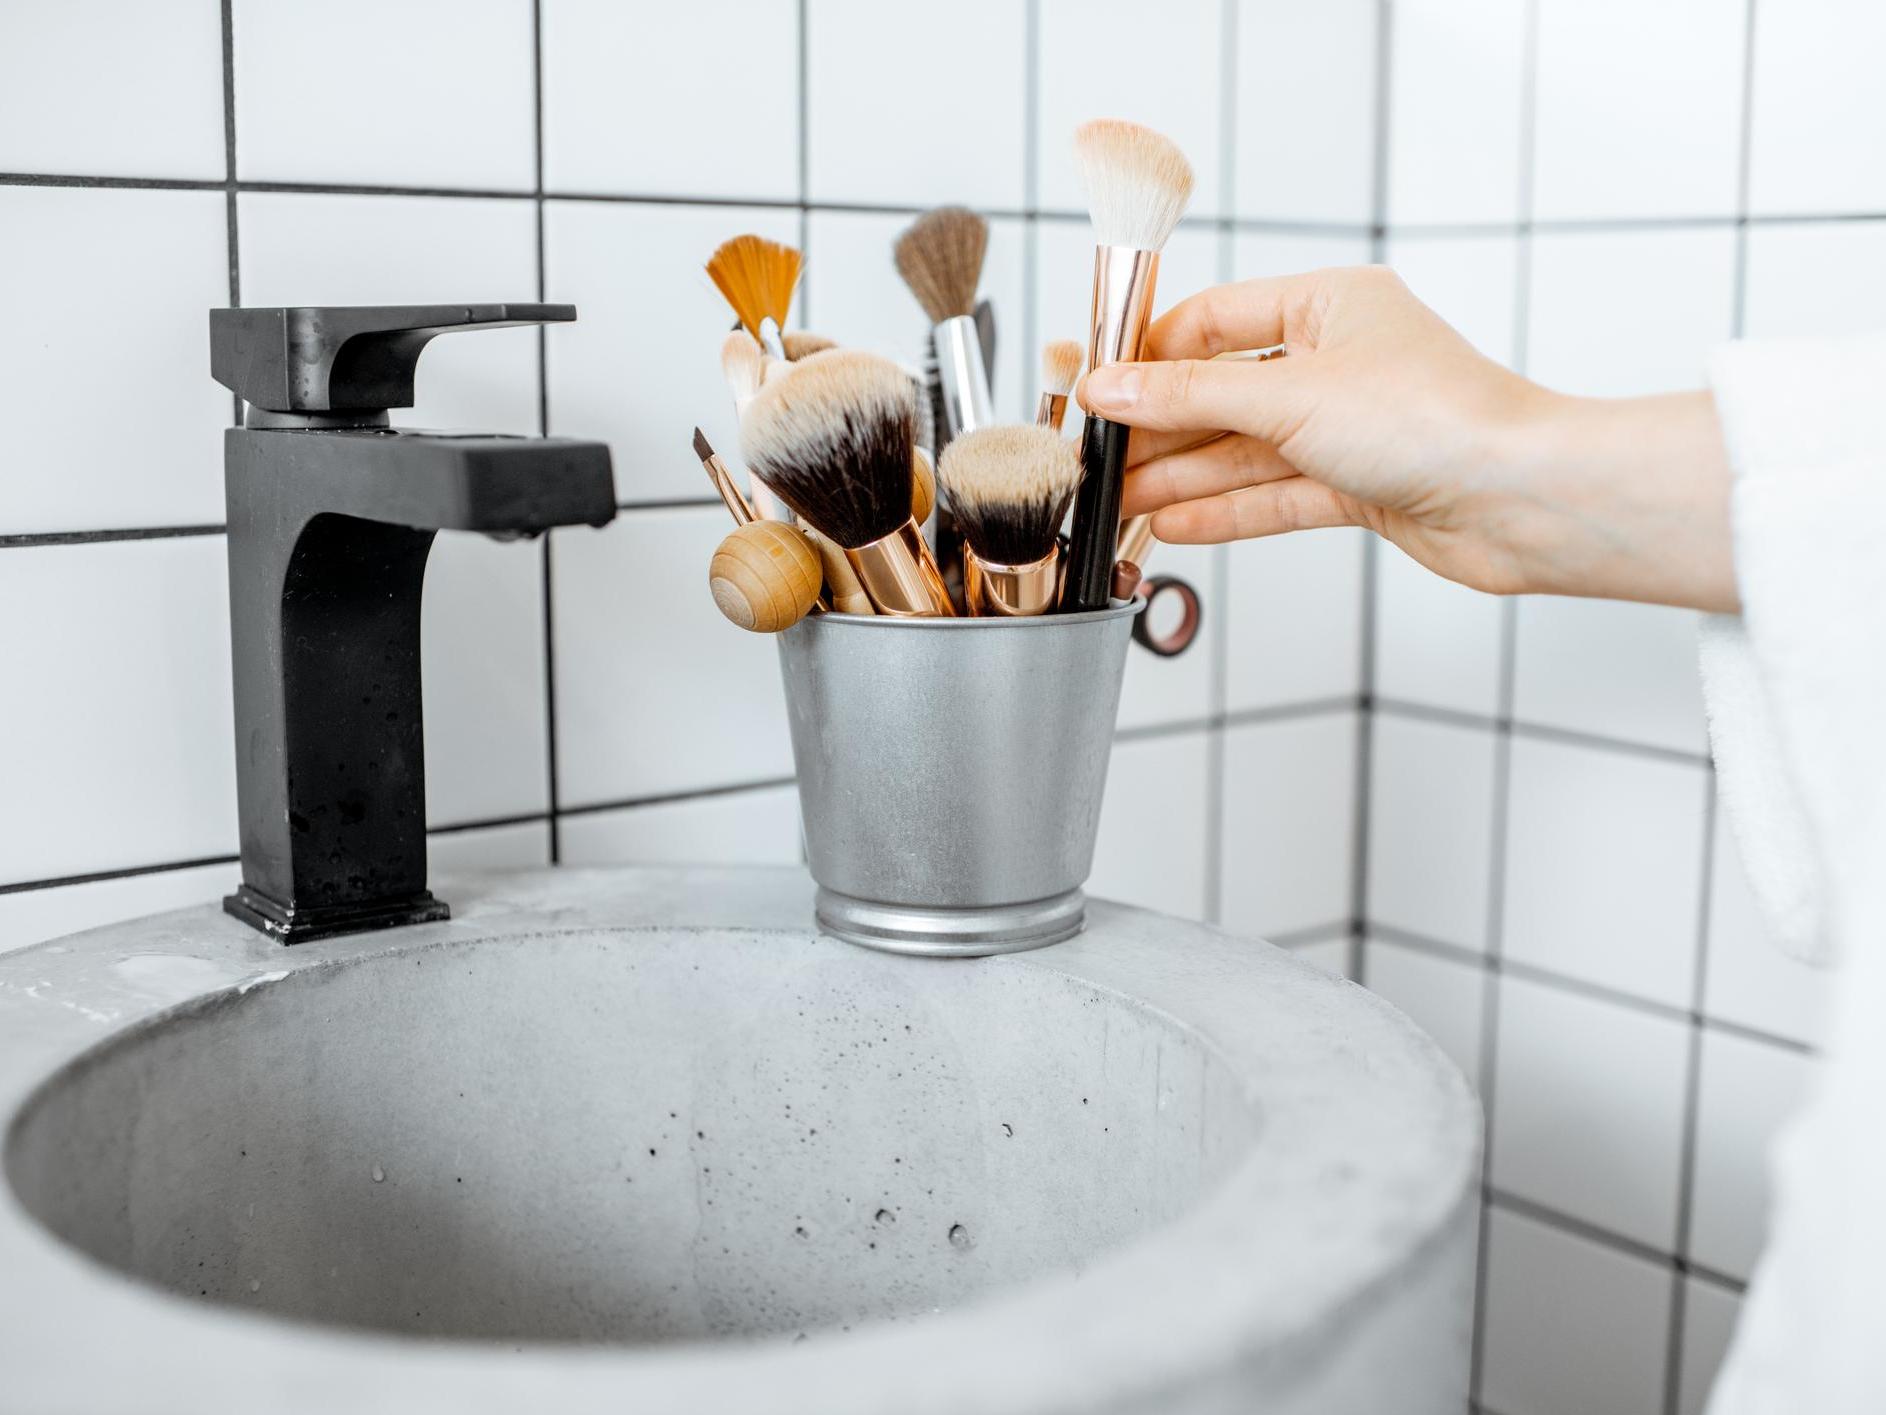 How to properly clean your make-up and brushes in the age of Covid-19